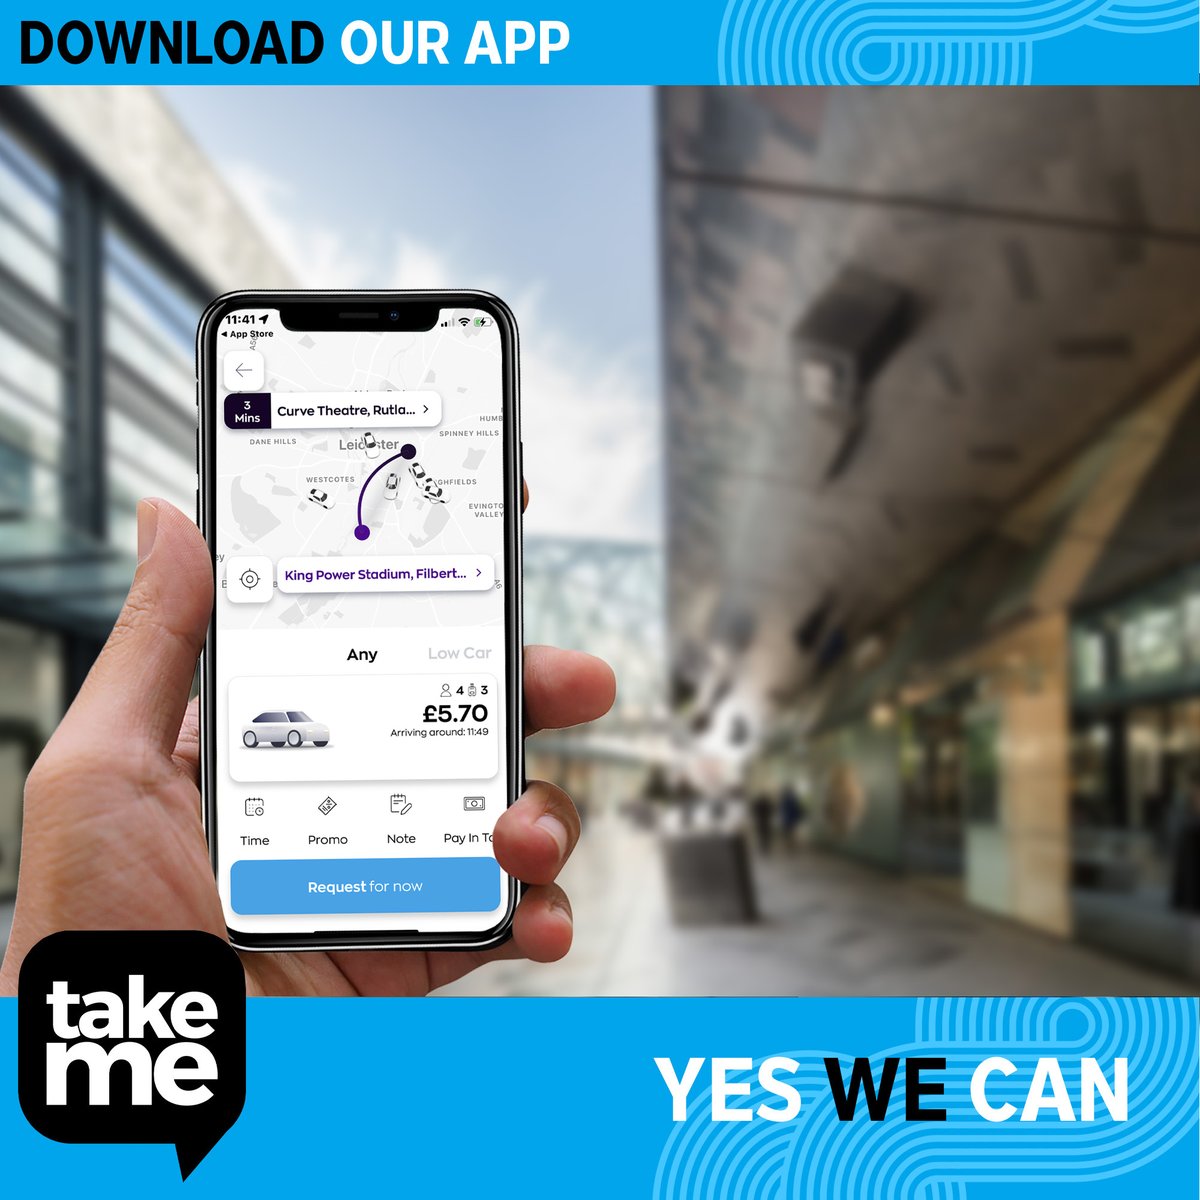 Need a ride into town today? Book your LOCAL Taxi Firm. Download our app and pre book today: takeme.taxi/app/ #TakeMe #Leicester #Loughborough